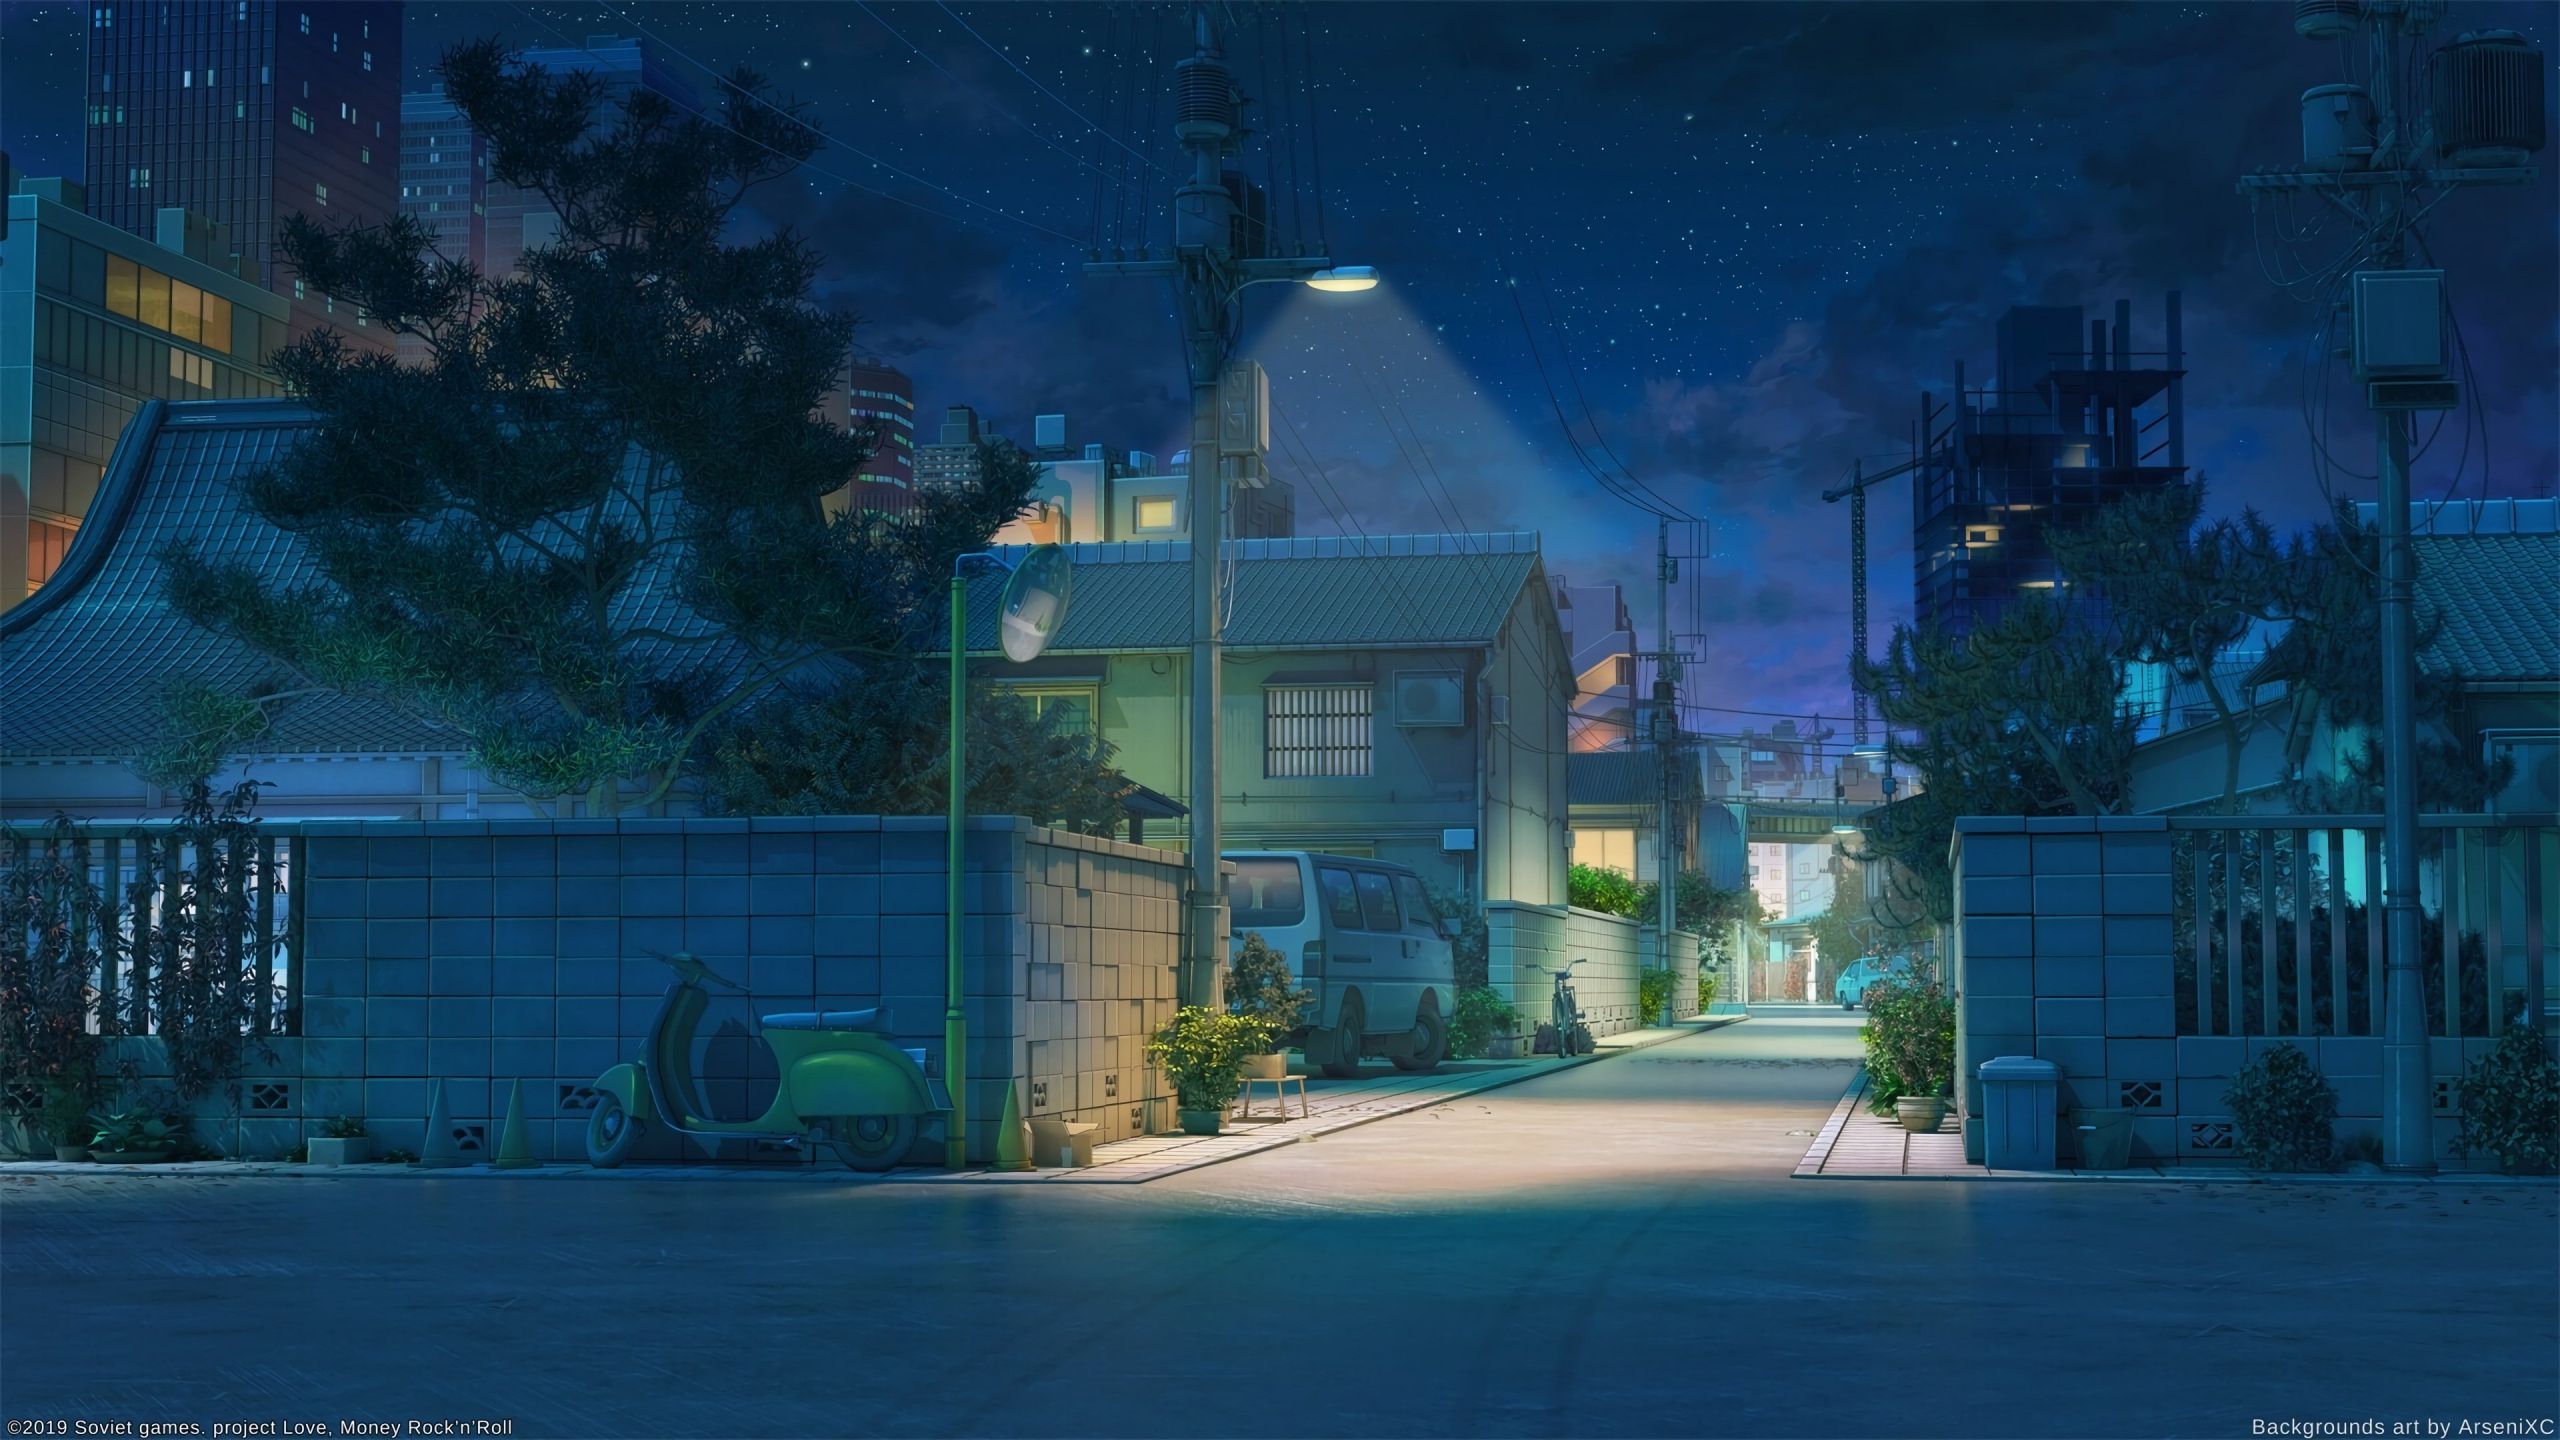 Anime Streets wallpaper in 2560x1440 resolution